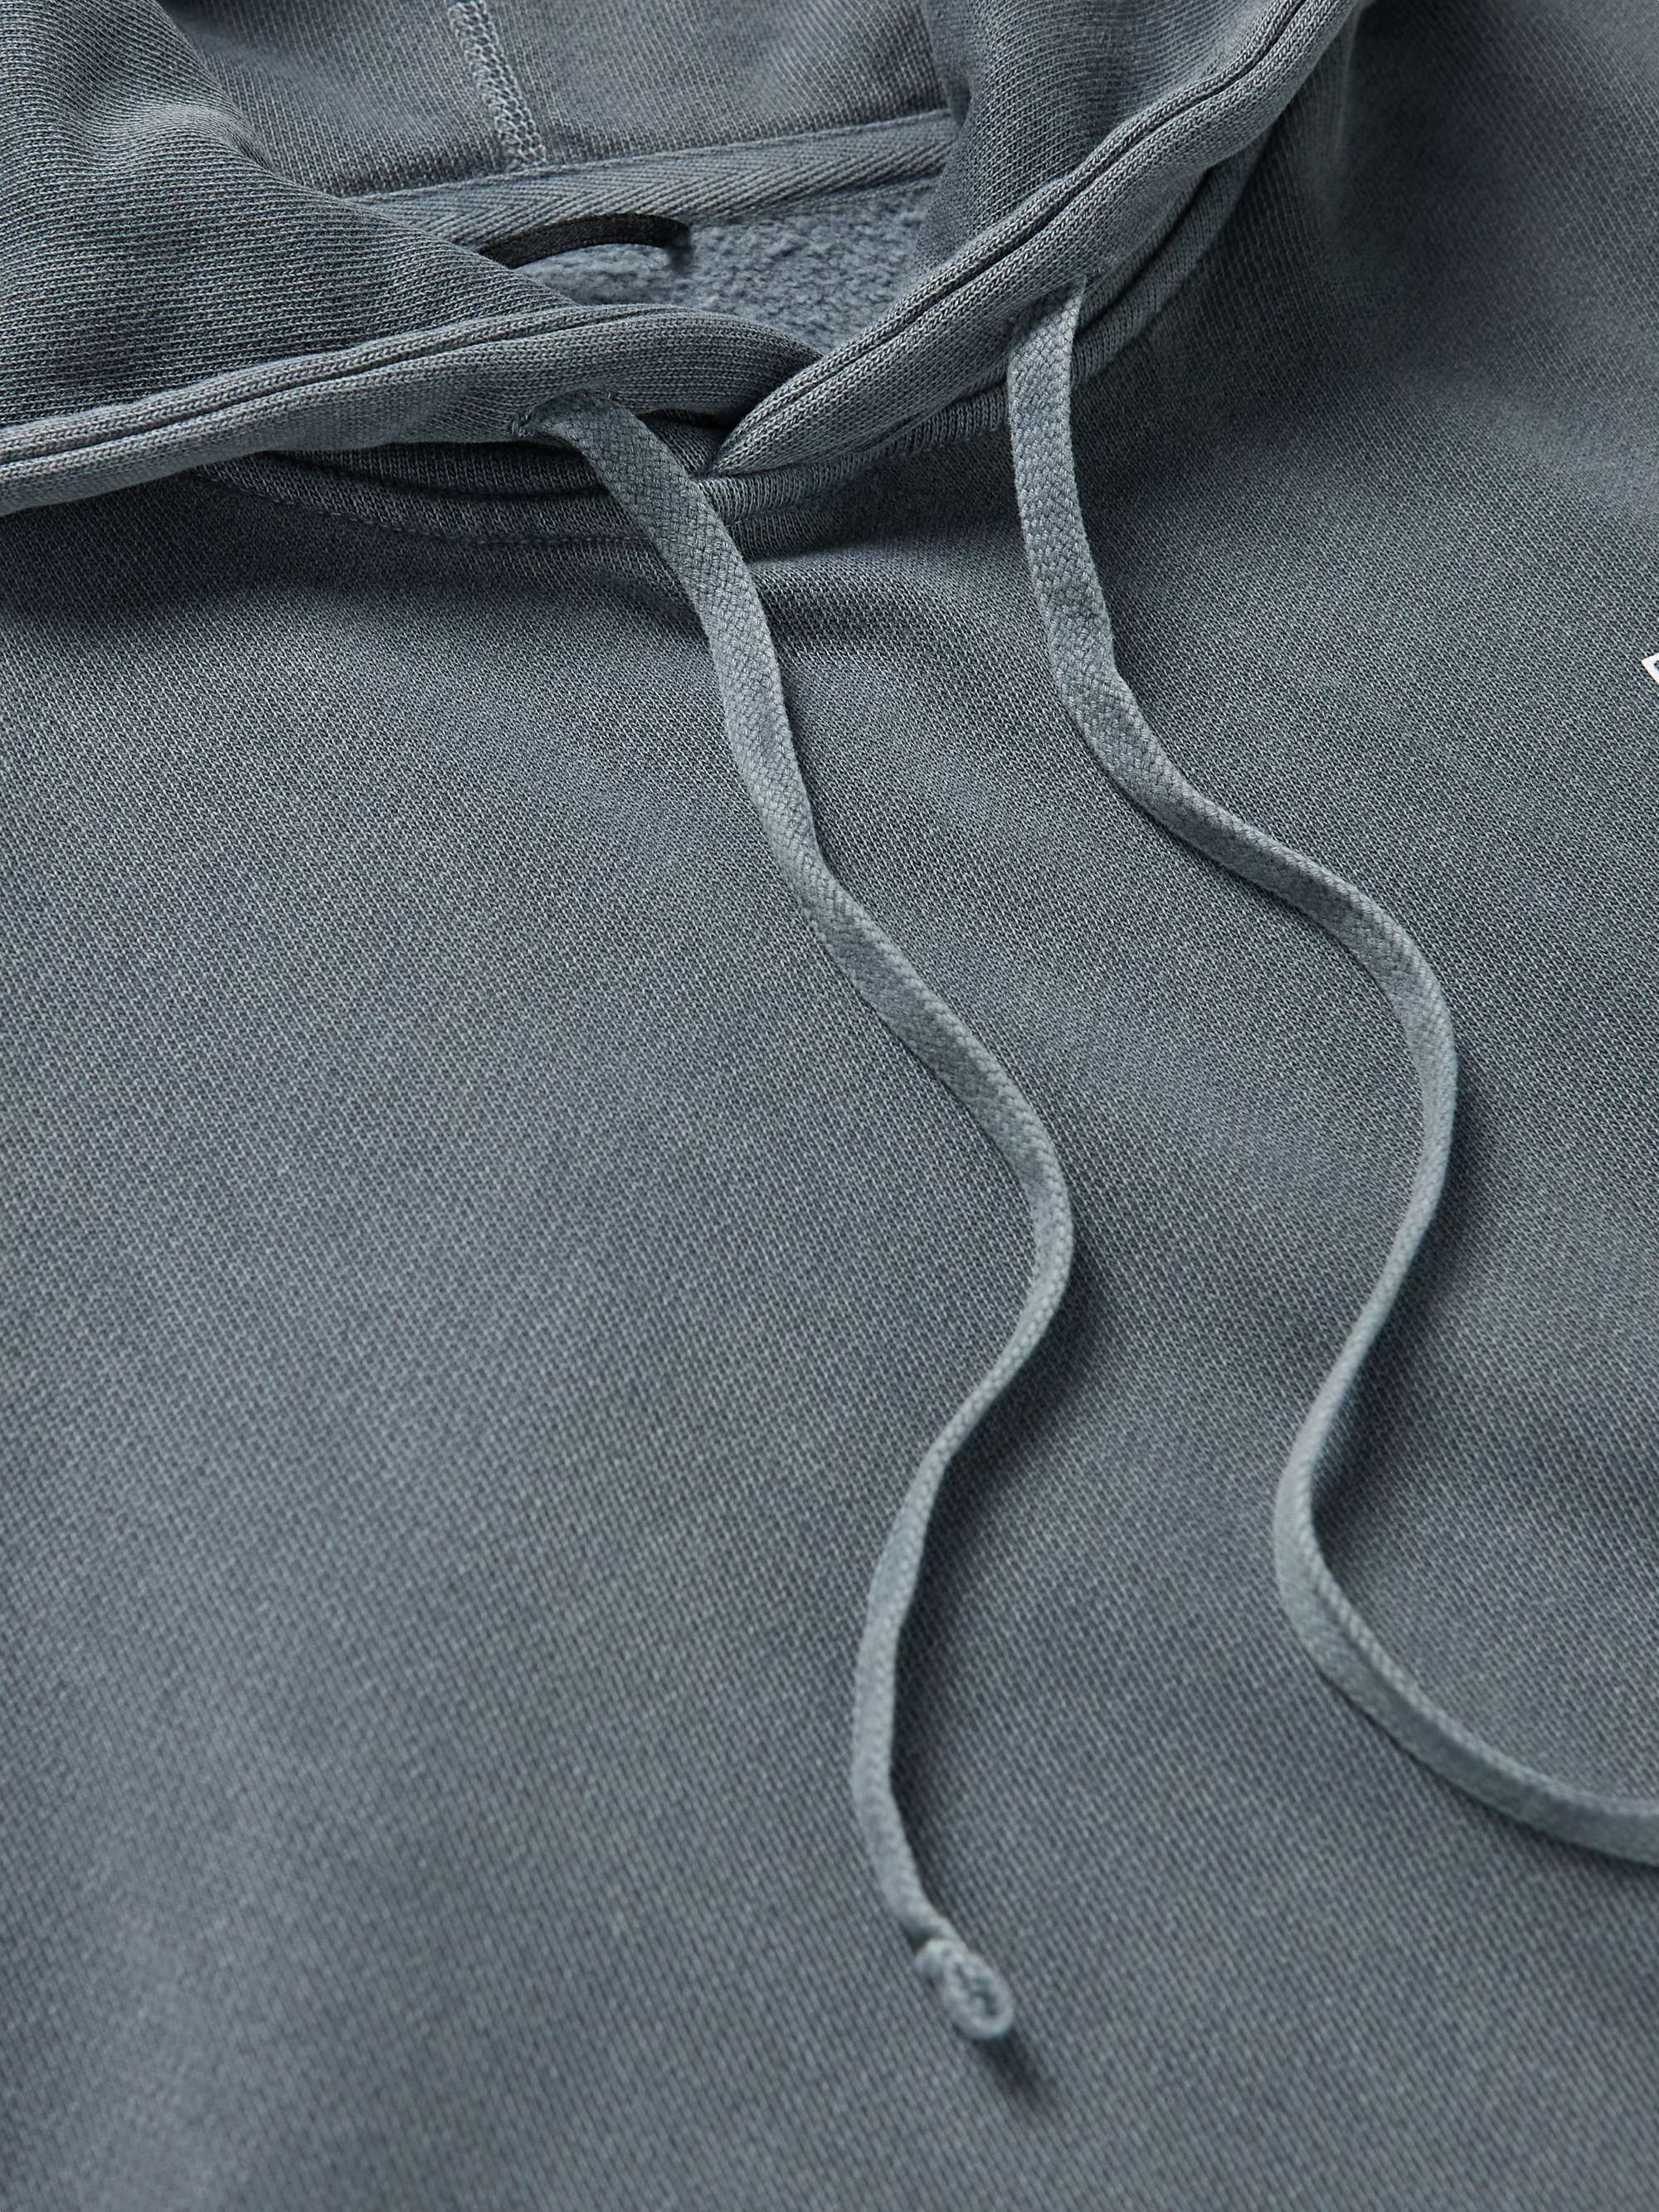 REIGNING CHAMP + Ryan Willms Garment-Dyed Printed Cotton-Blend Jersey Hoodie